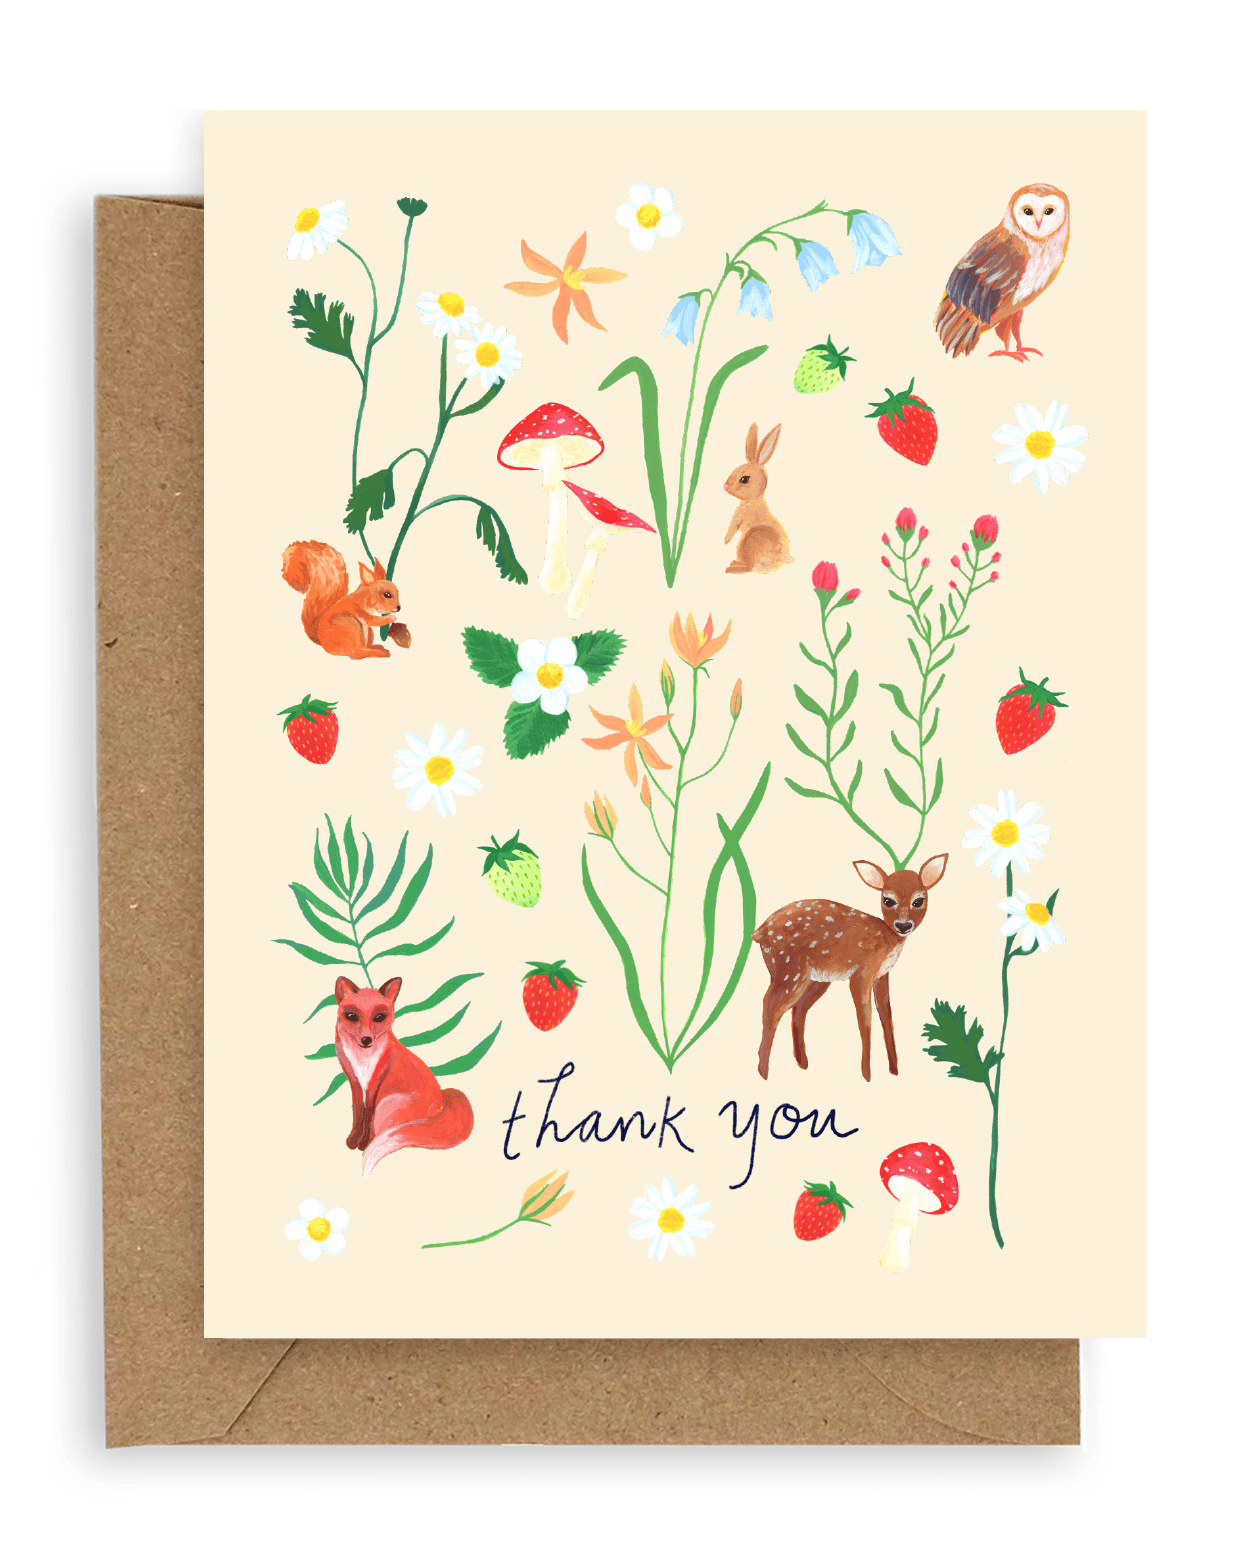 Our exciting new Holiday gift wrap features a stunning array of forest animals and flora. There are Owls, Deer, Rabbits, Squirrels, Foxes, Mushrooms, berries and various kinds of flora with orange, white, red, blue, and yellow blooms above the words &quot;thank you&quot; printed on a cream background. Shown with kraft envelope.